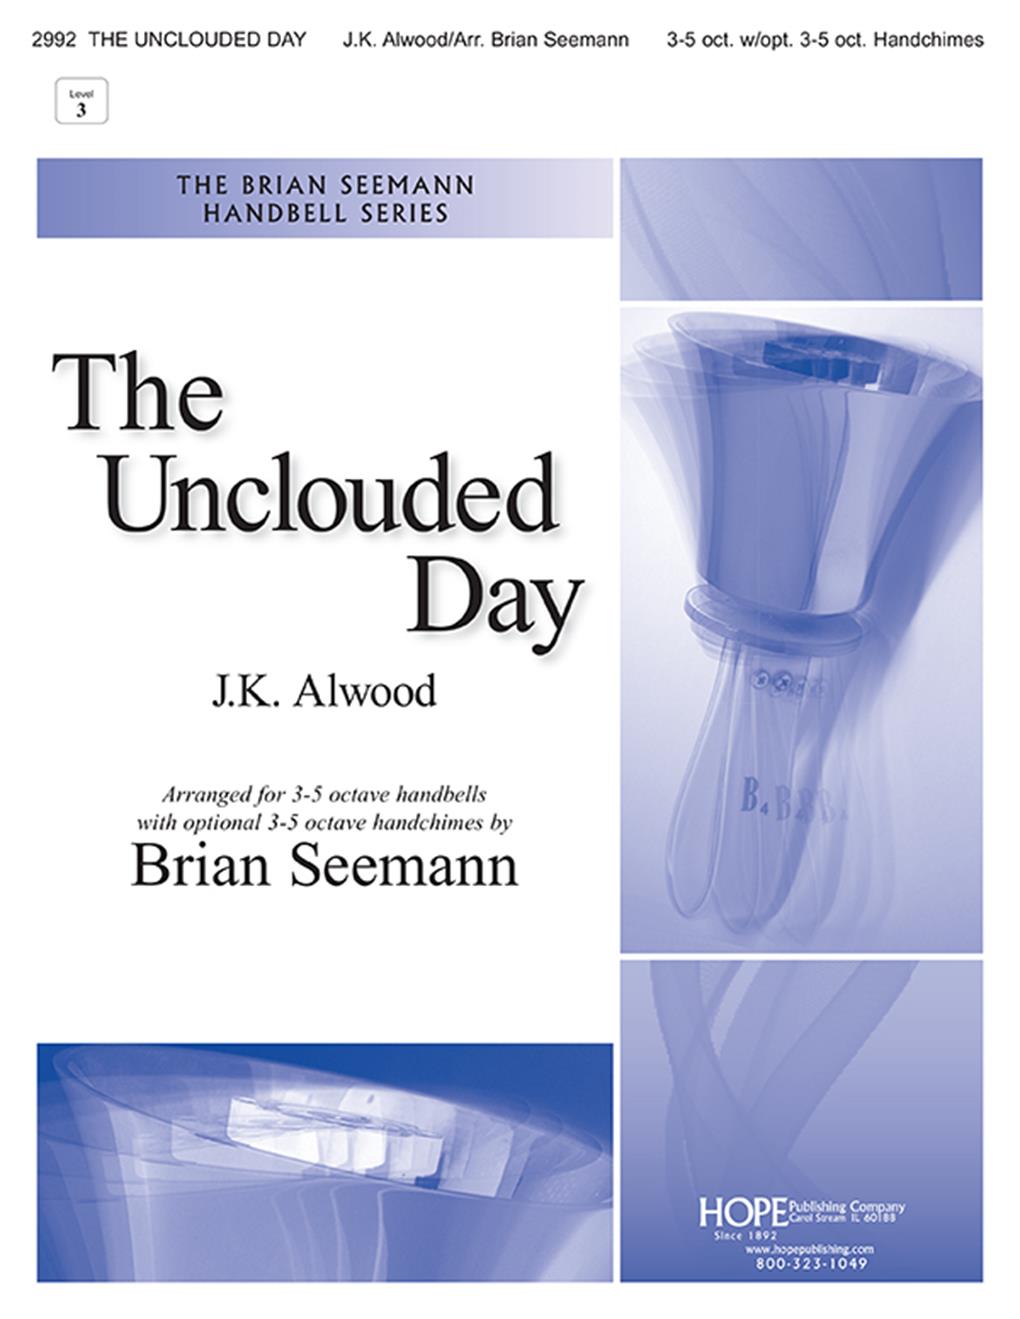 The Unclouded Day - 3-5 Oct. Cover Image